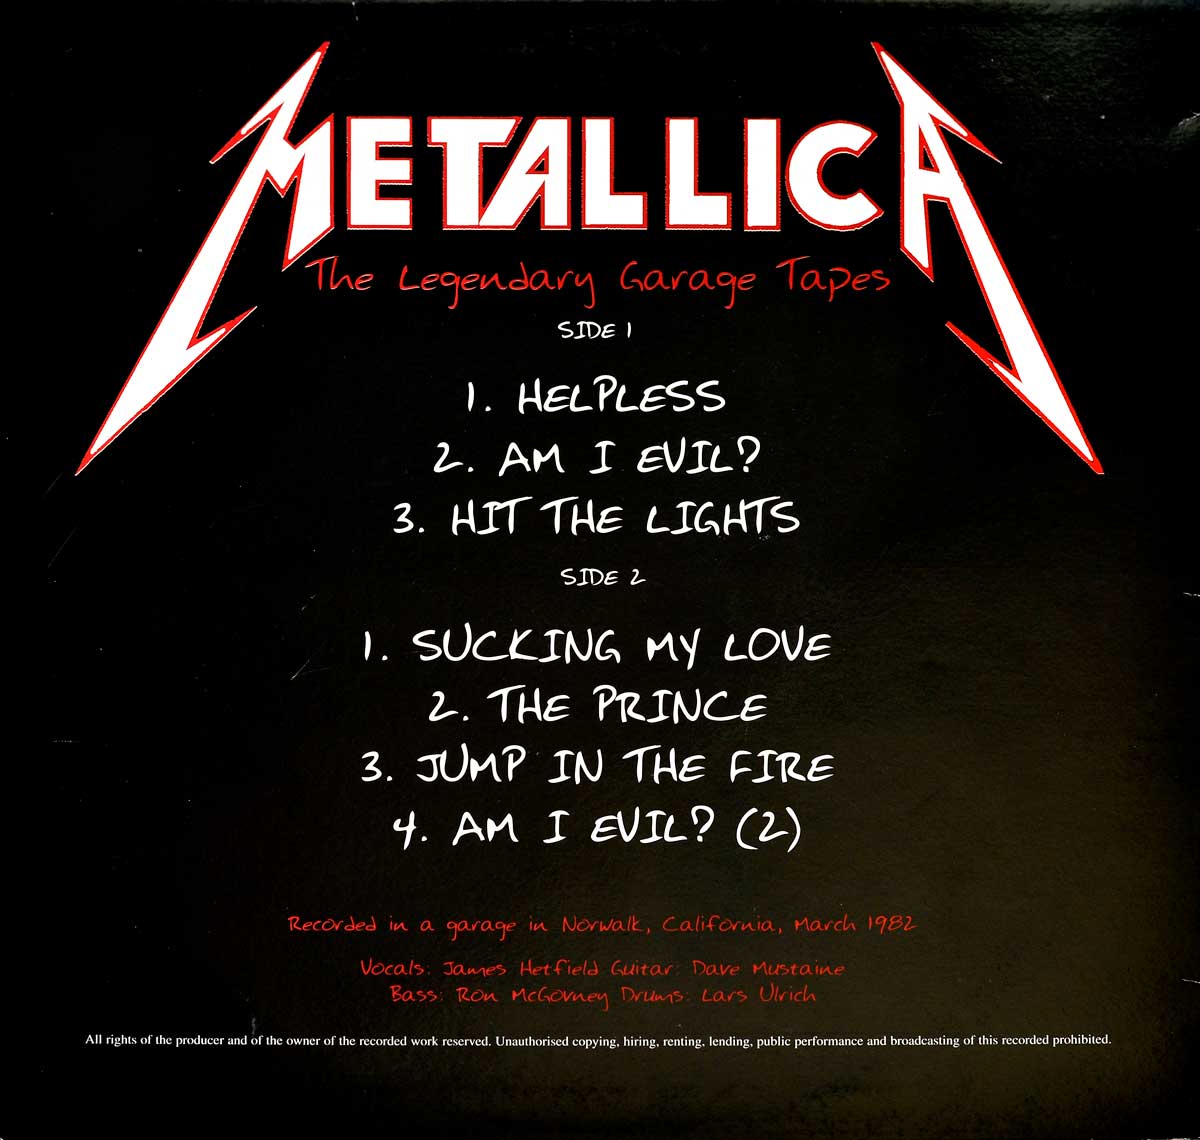 Photo of album back cover METALLICA - The legendary Garage Tapes ( Unofficial Record )  